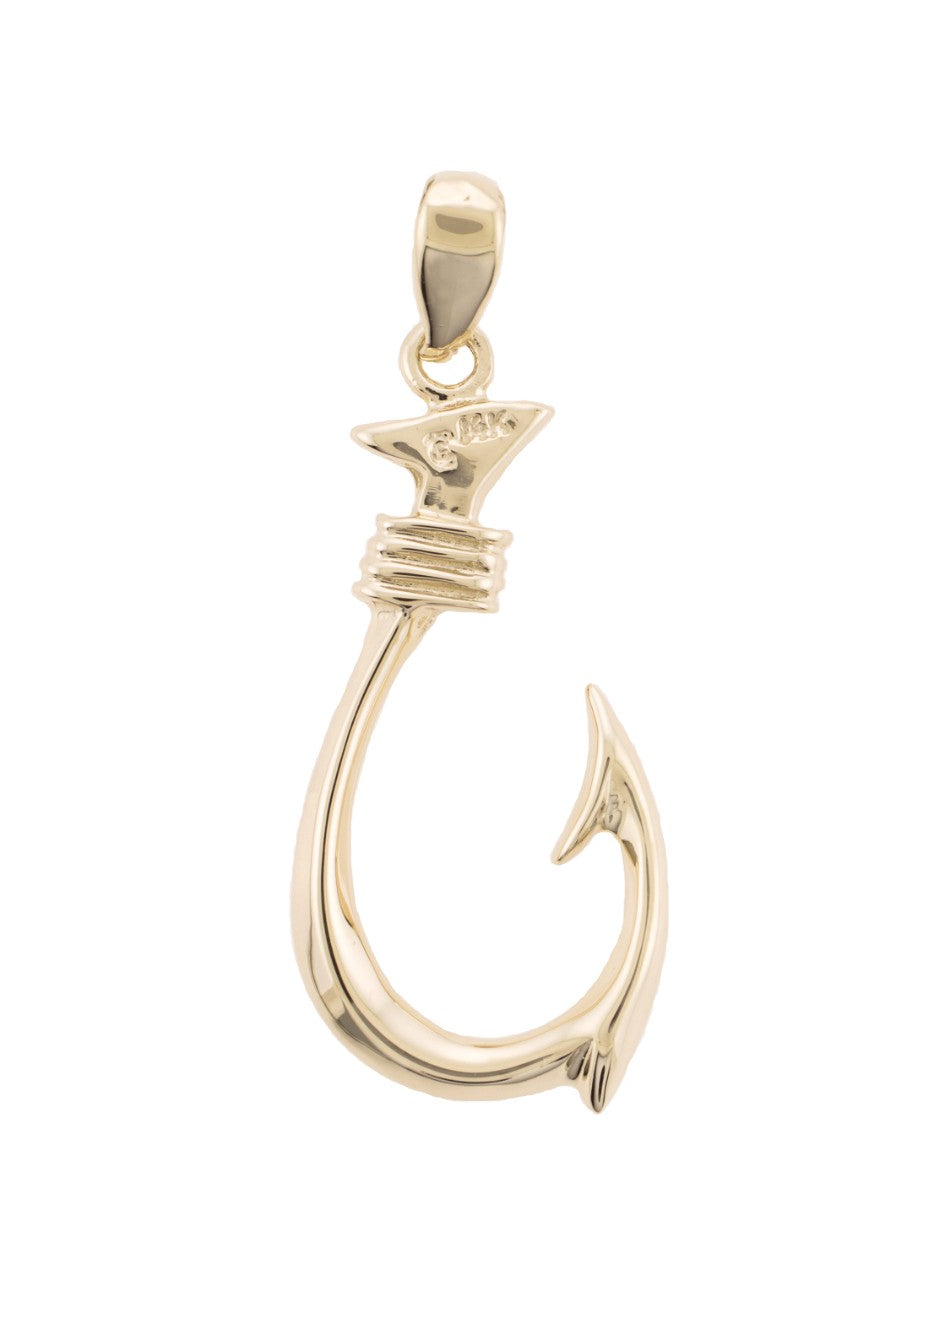 14K Fish Hook Pendant with Small Anchor On 1 1/4 Long Chain